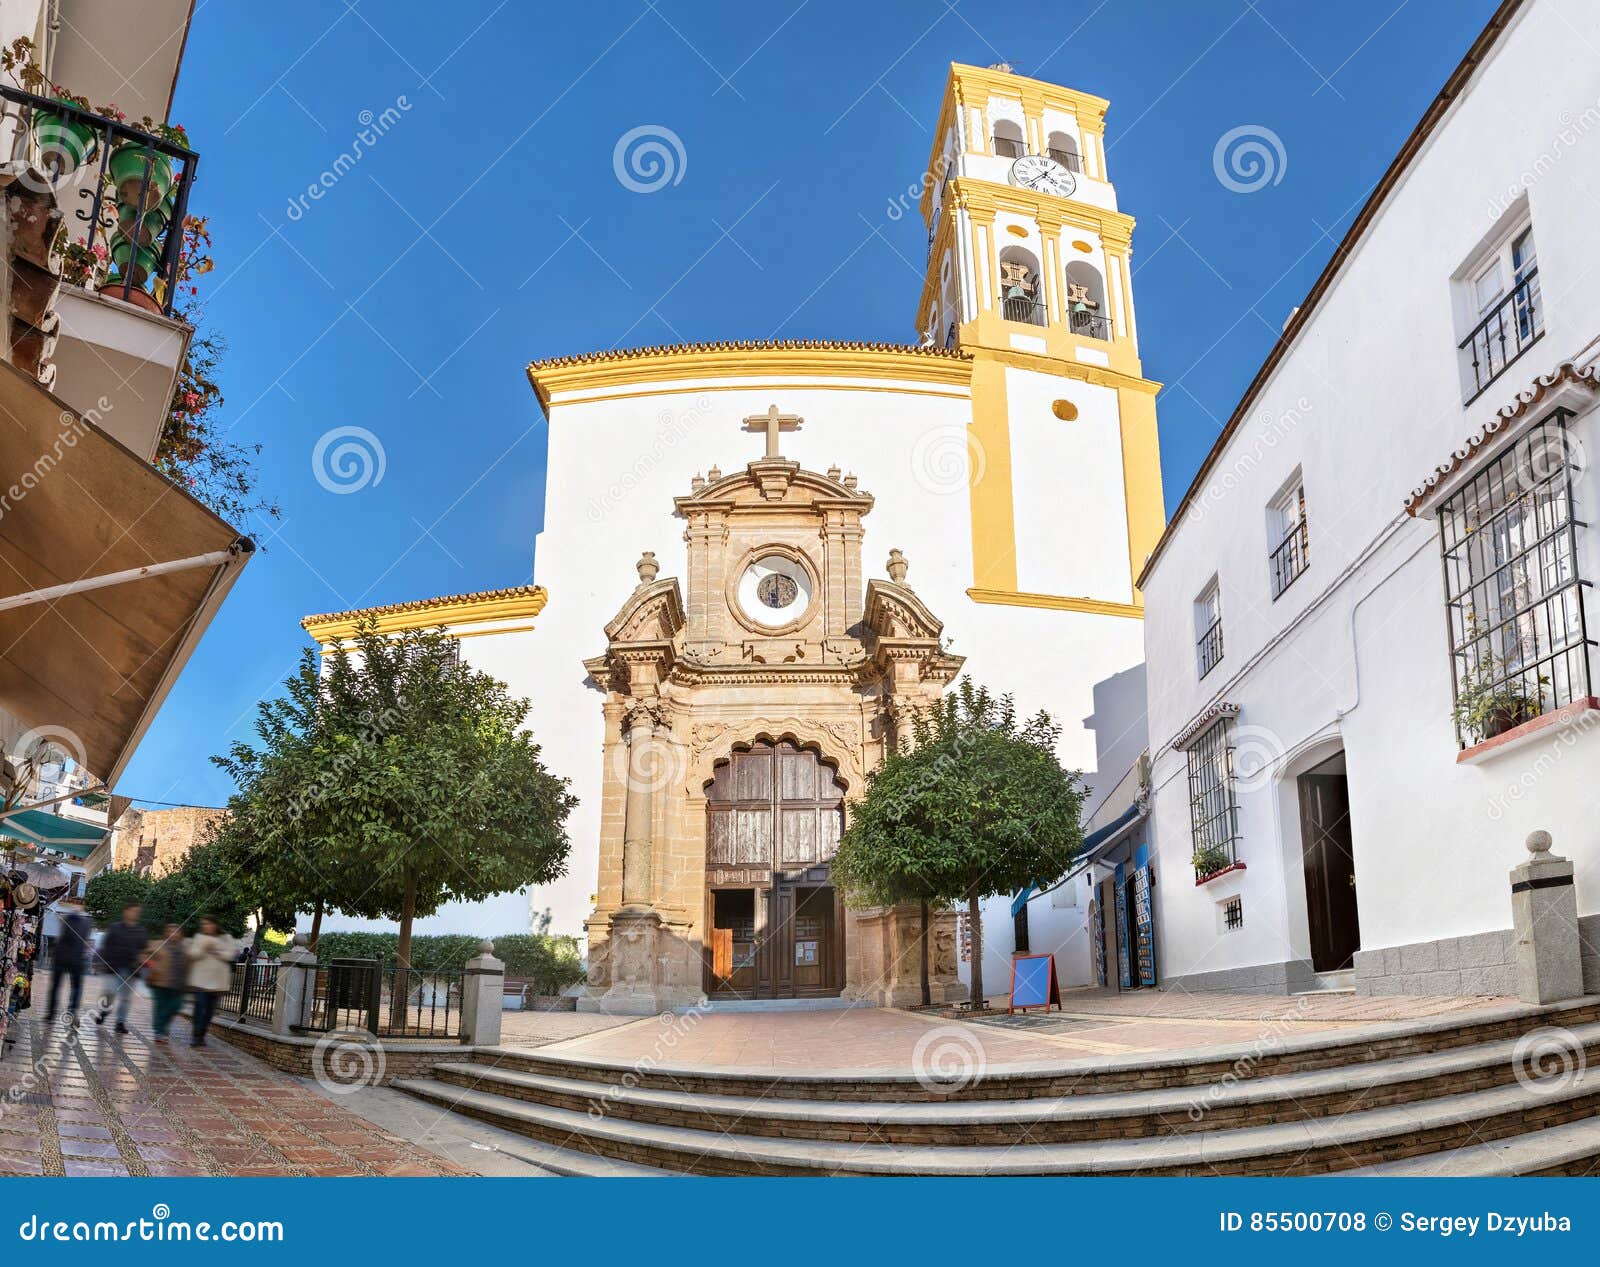 church in the old town of marbella